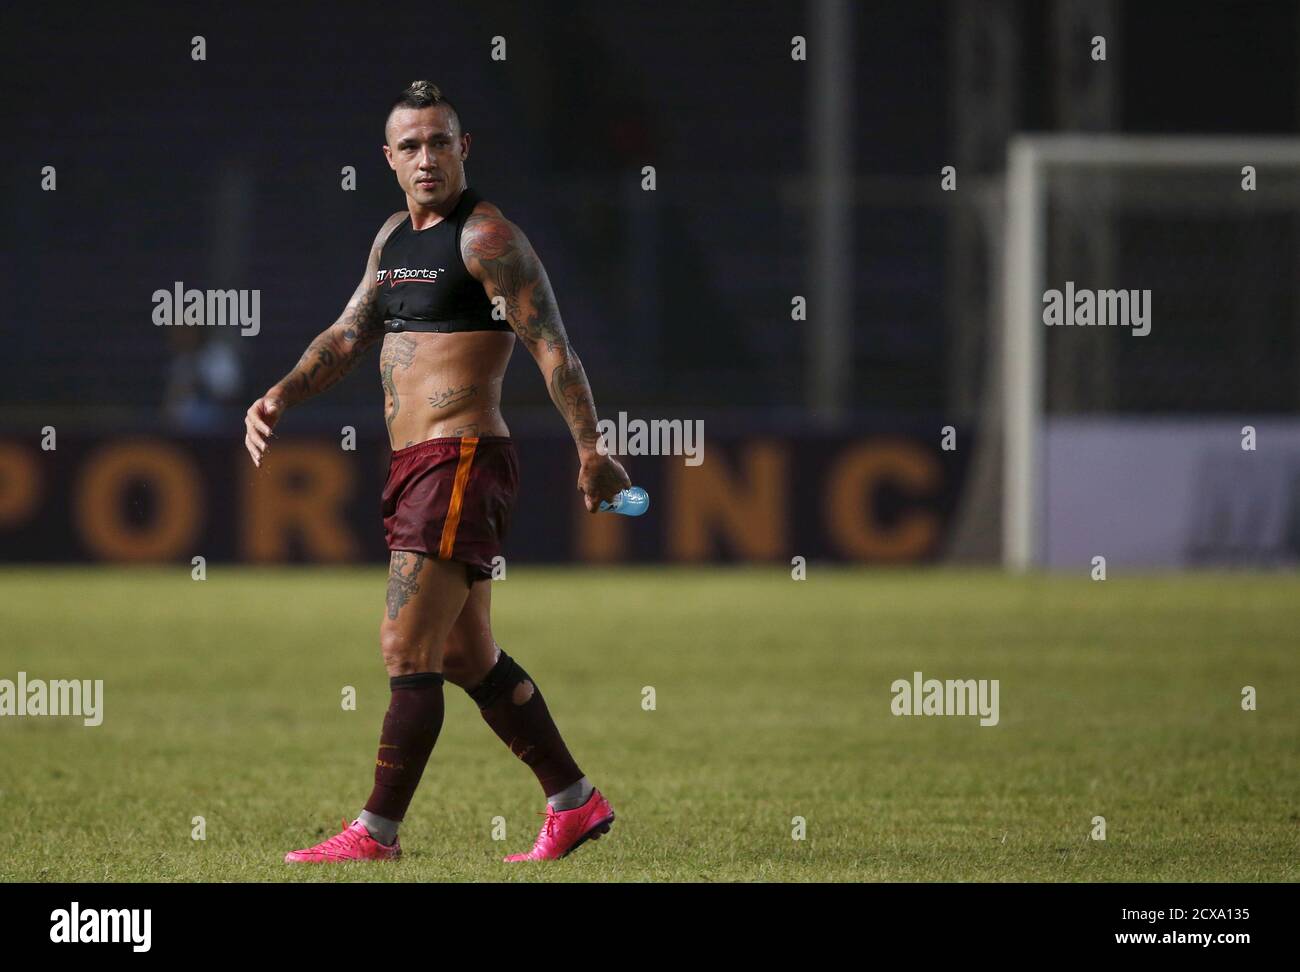 As Roma S Radja Nainggolan Leaves The Pitch Following An Intra Team Exhibition Match At Gelora Bung Karno Stadium In Jakarta Indonesia July 25 2015 Roma Are On The Final Leg Of Their Pre Season